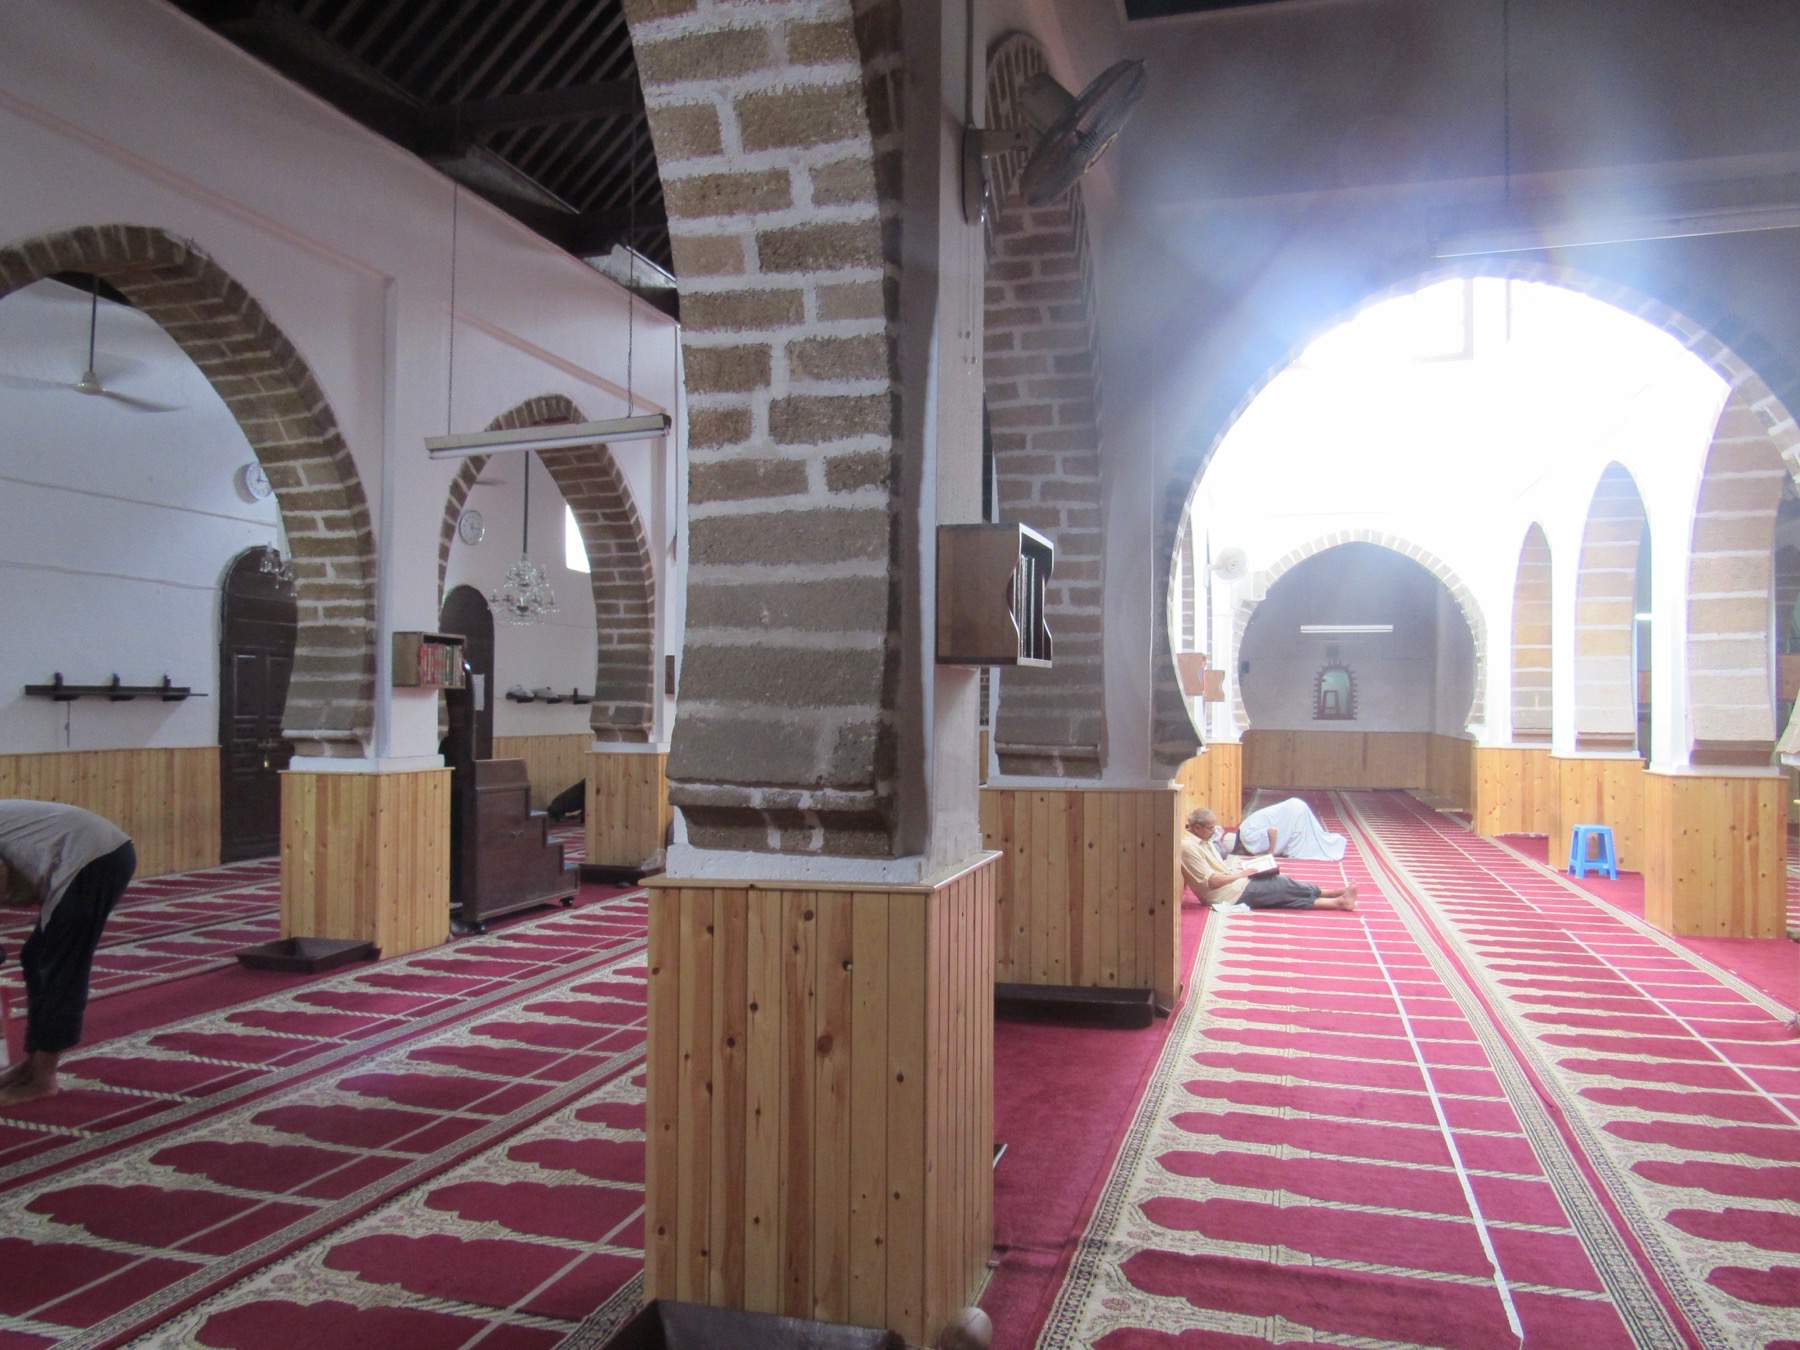 Interior view of the prayer hall showing the brickwork on the arches